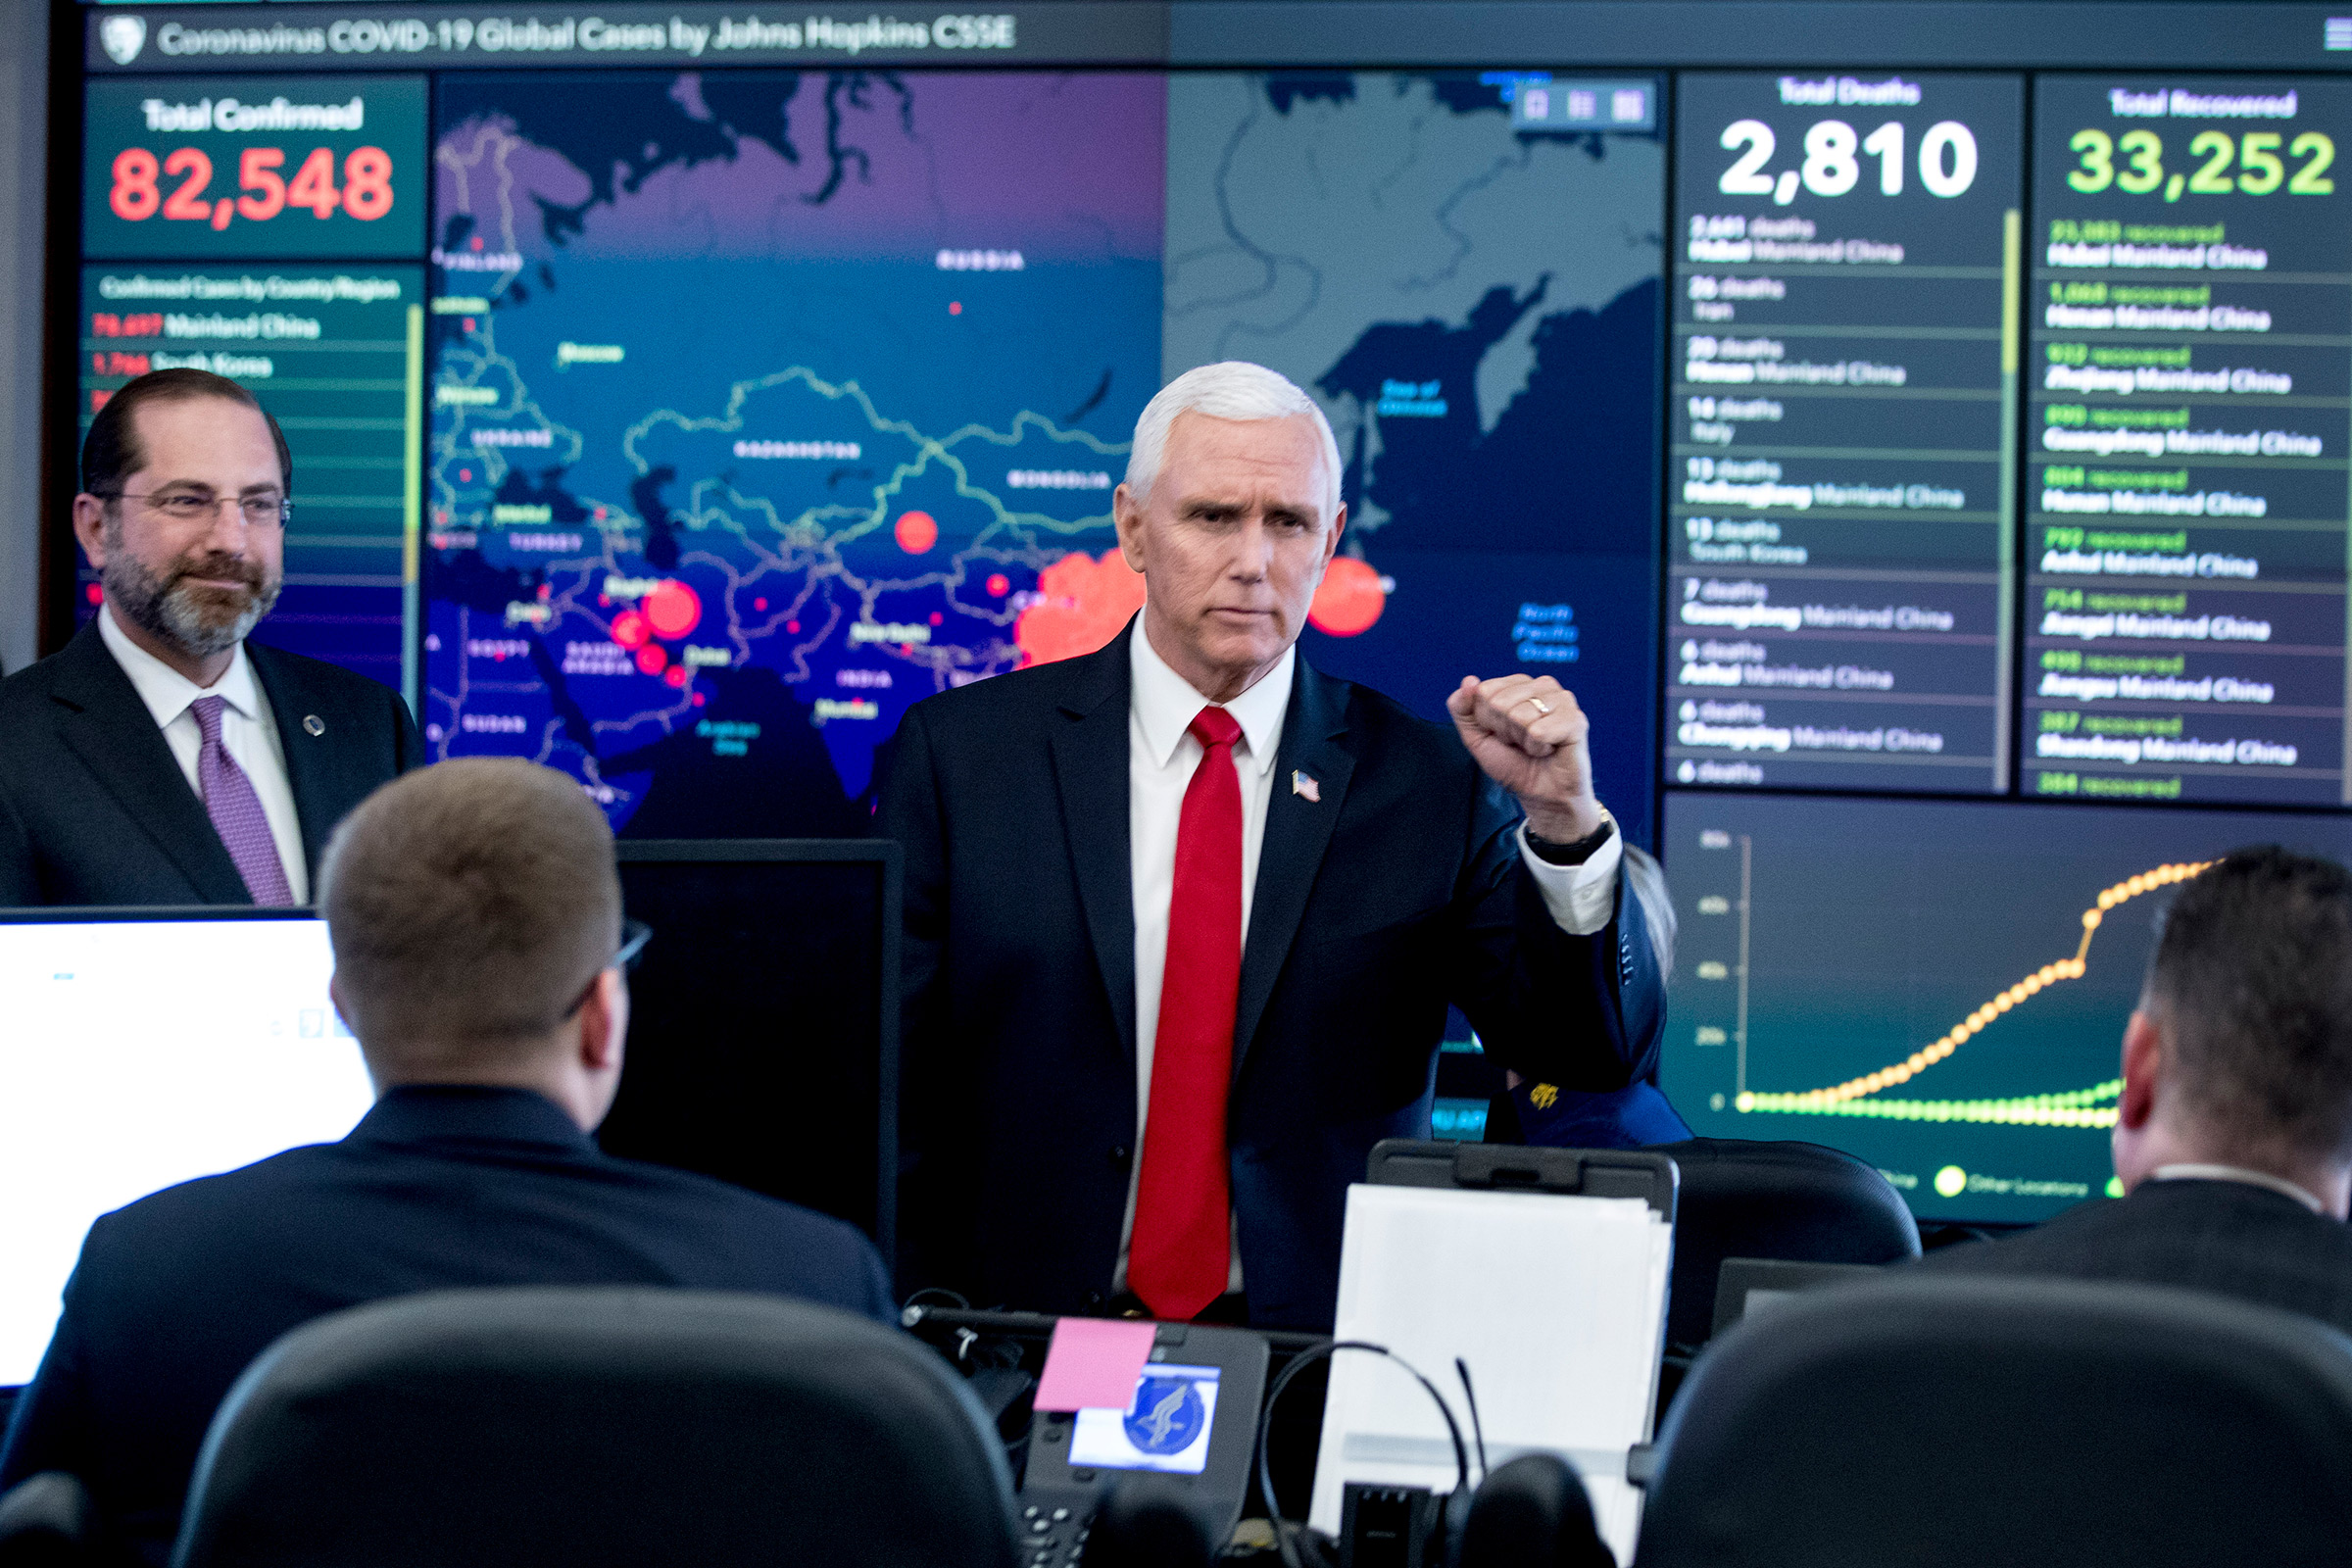 A large monitor displaying a map of Asia and a tally of total coronavirus cases, deaths, and recovered, is visible behind Vice President Mike Pence, center, and Health and Human Services Secretary Alex Azar, left, as they tour the Secretary's Operations Center following a coronavirus task force meeting at the Department of Health and Human Services in Washington, D.C., on Feb. 27, 2020.